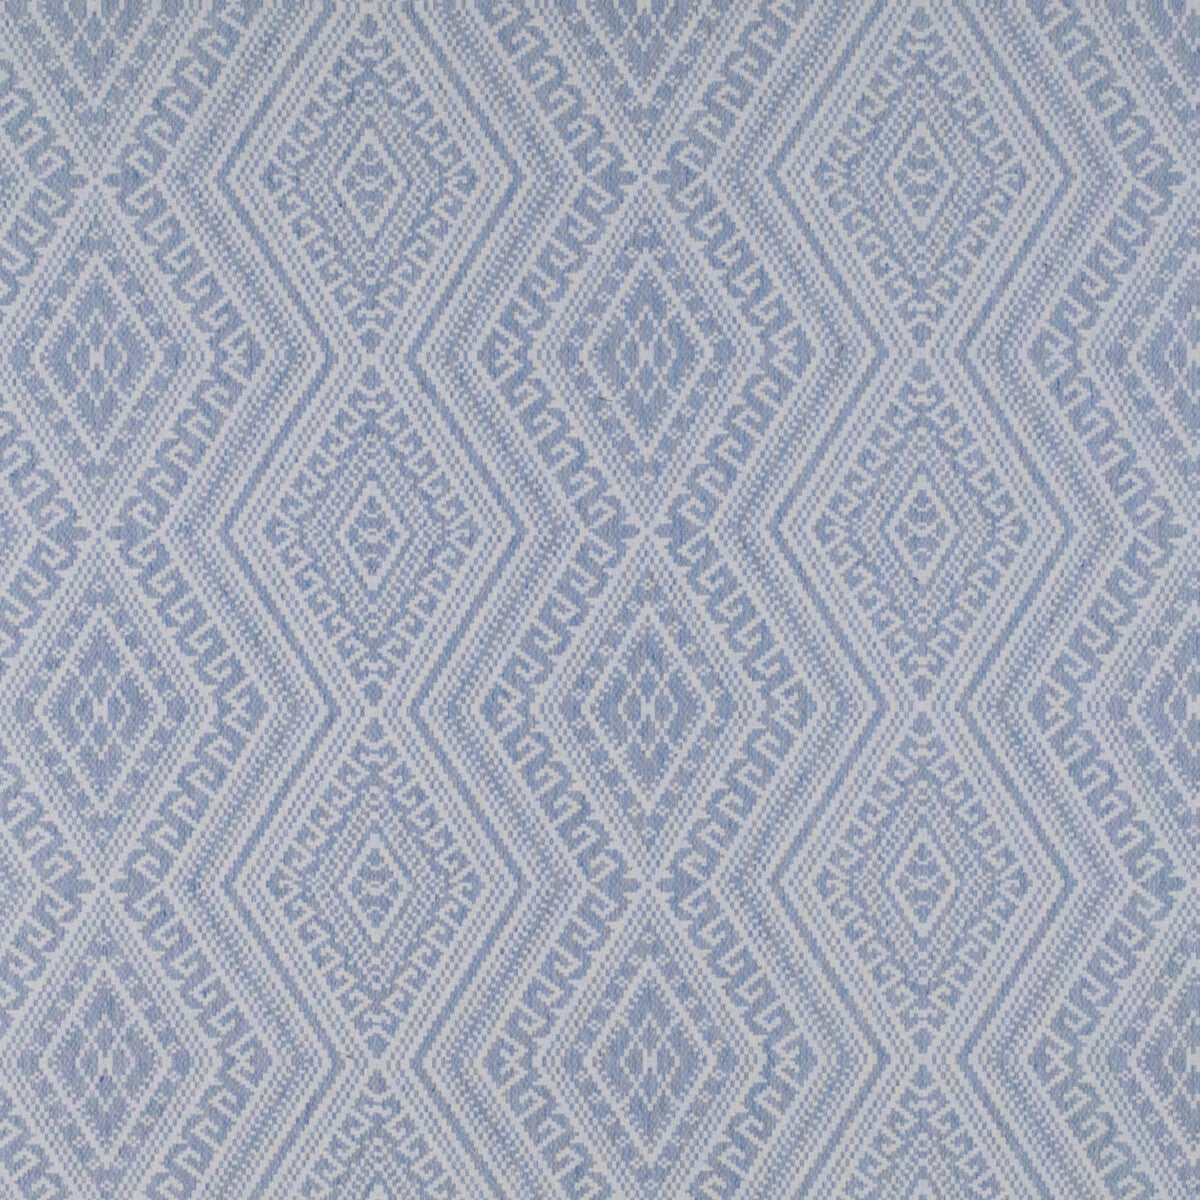 Estromboli fabric in azul claro color - pattern GDT5313.001.0 - by Gaston y Daniela in the Tierras collection